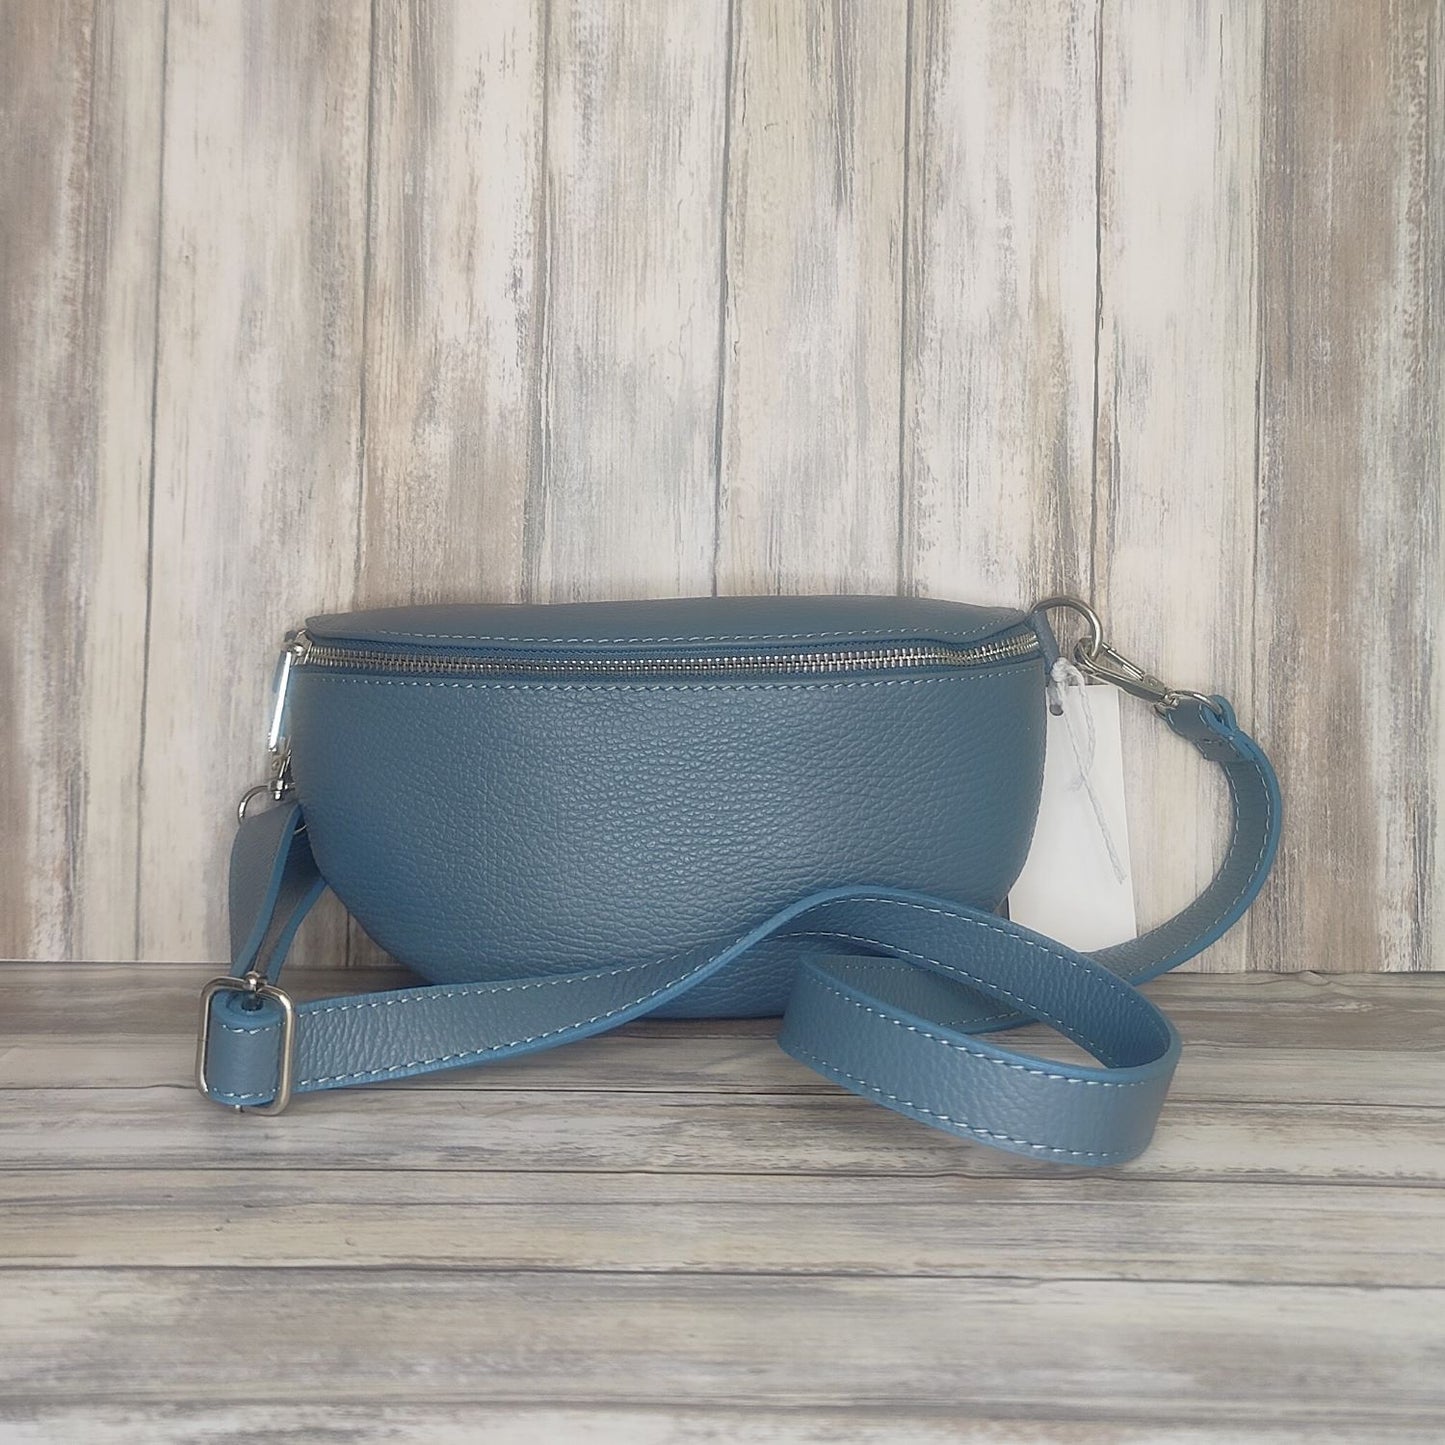 Made with soft  Italian leather, our Sling Bag/Bum Bag is the perfect combination of chic and practical. Enjoy easy access to your essentials when you're on the go, and elevate your look with confidence!  Top Zip Closure  Internal pocket  Silver Hardware  h:12cm x w:26cm x d:9cm 